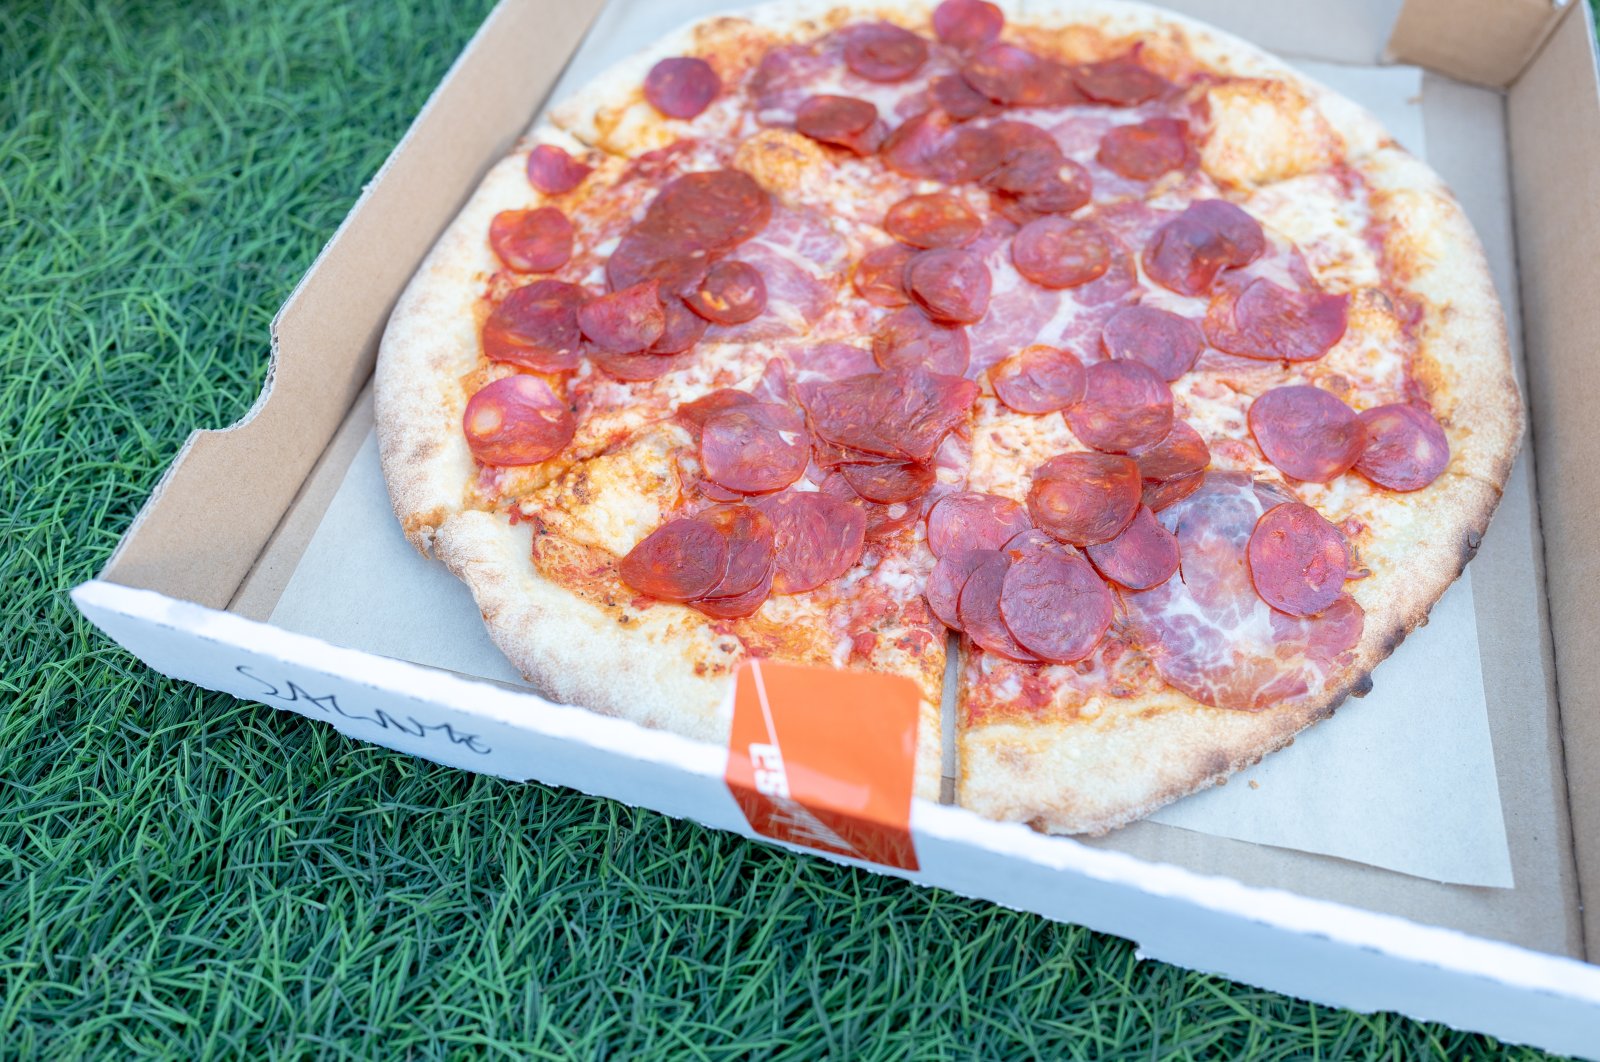 A pepperoni pizza in a white pizza box, San Francisco, the U.S., Dec. 18, 2020. (Getty Images)